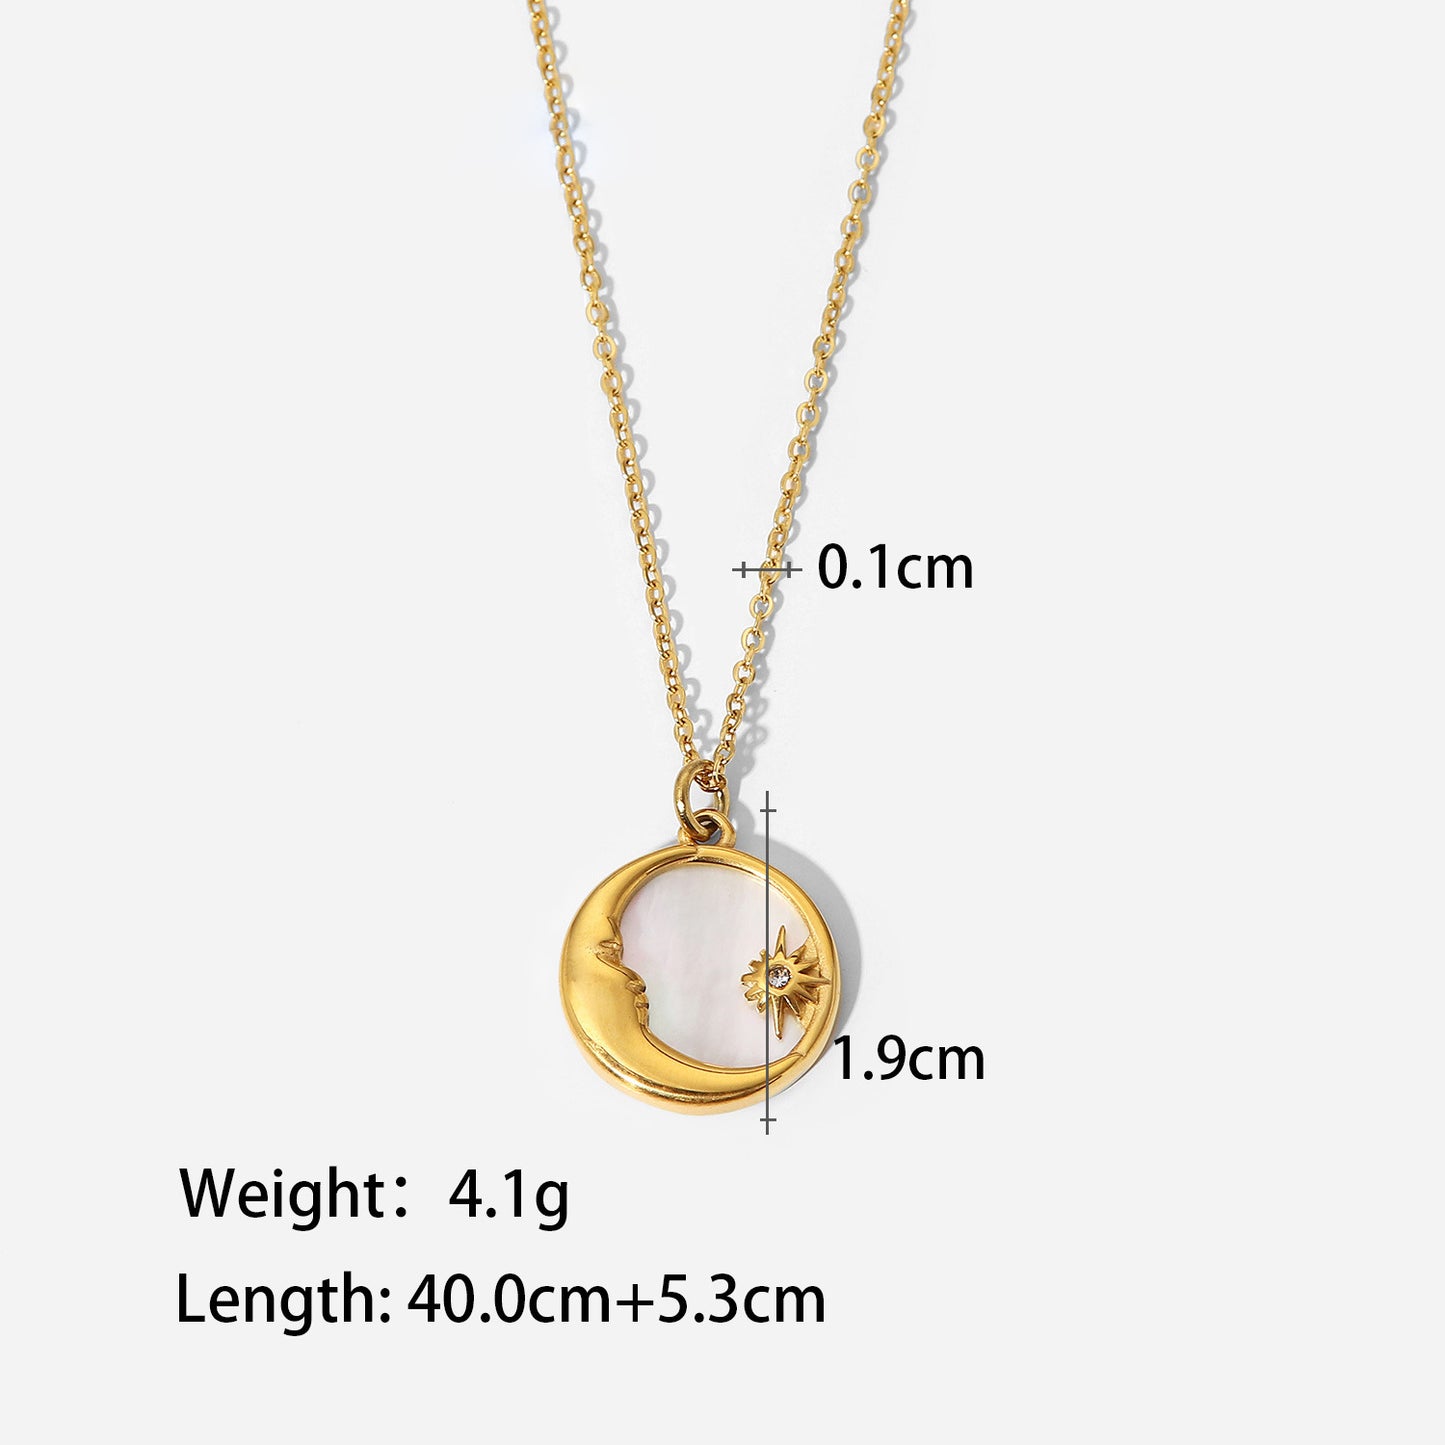 8K Gold Plated Oval Sun Moon Shell Pendant Necklace